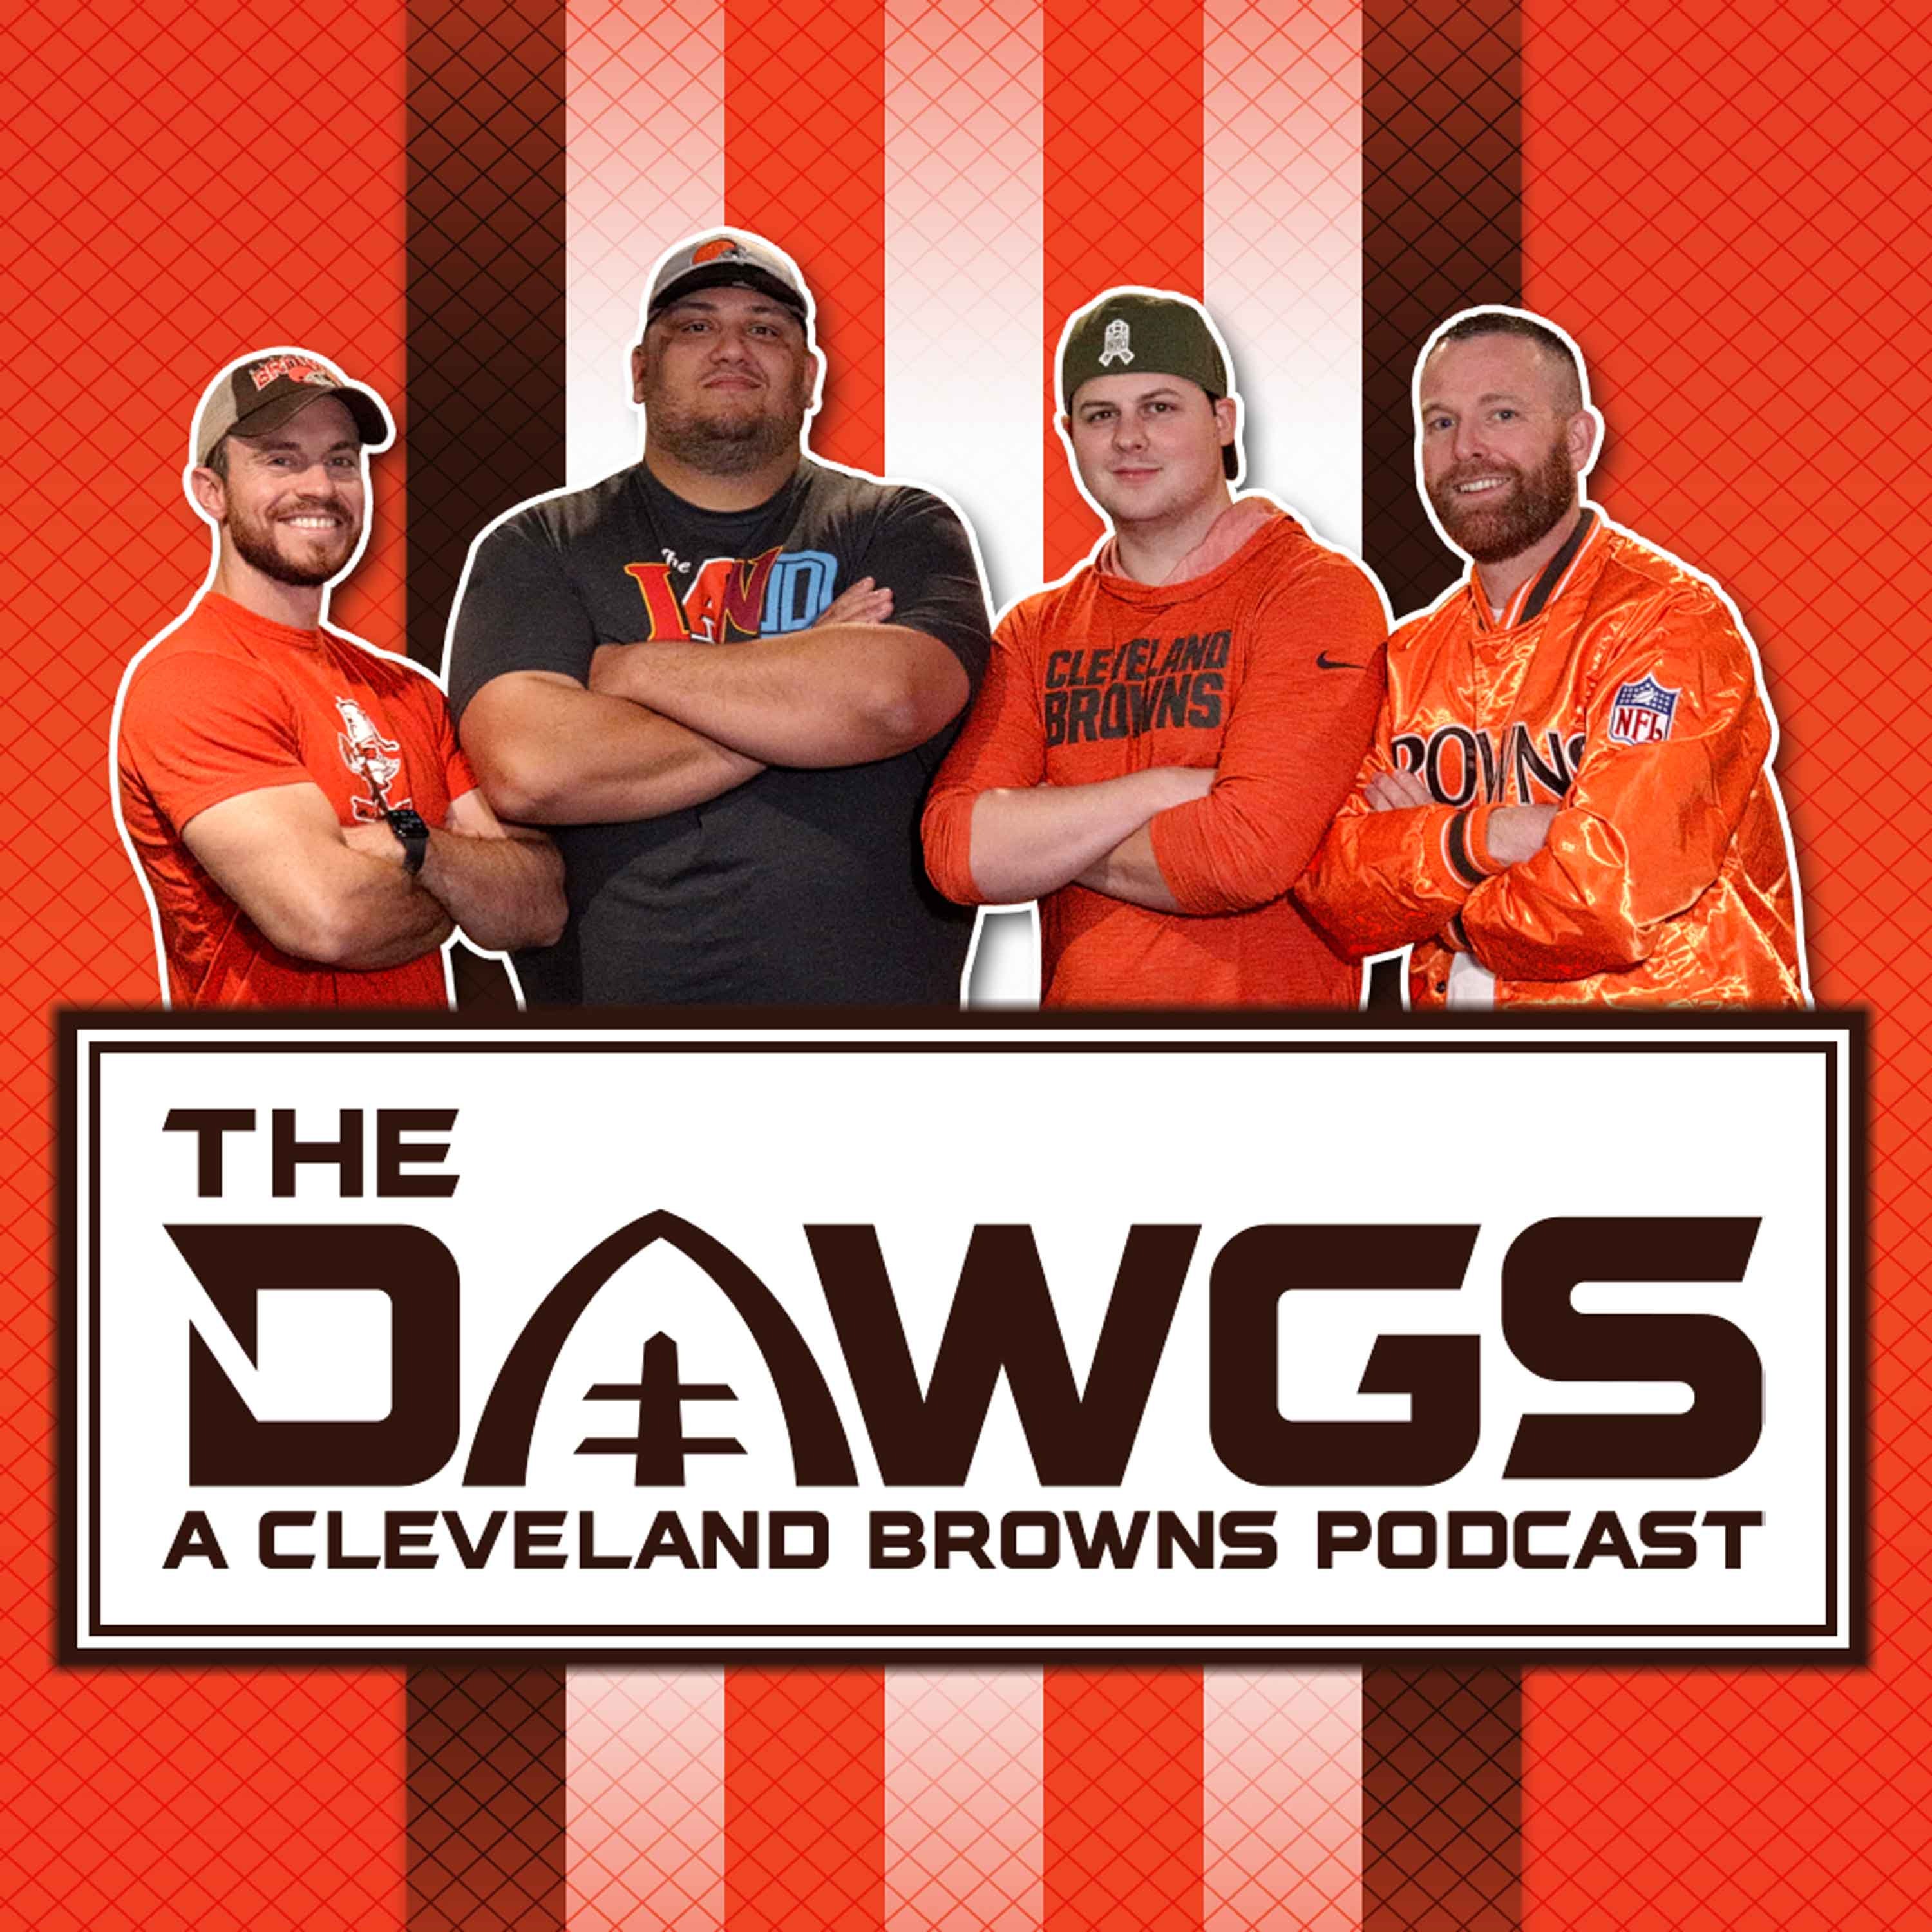 Week 16 Preview - Cleveland Browns vs New Orleans Saints  | The Dawgs - A Cleveland Browns Podcast - December 22, 2022